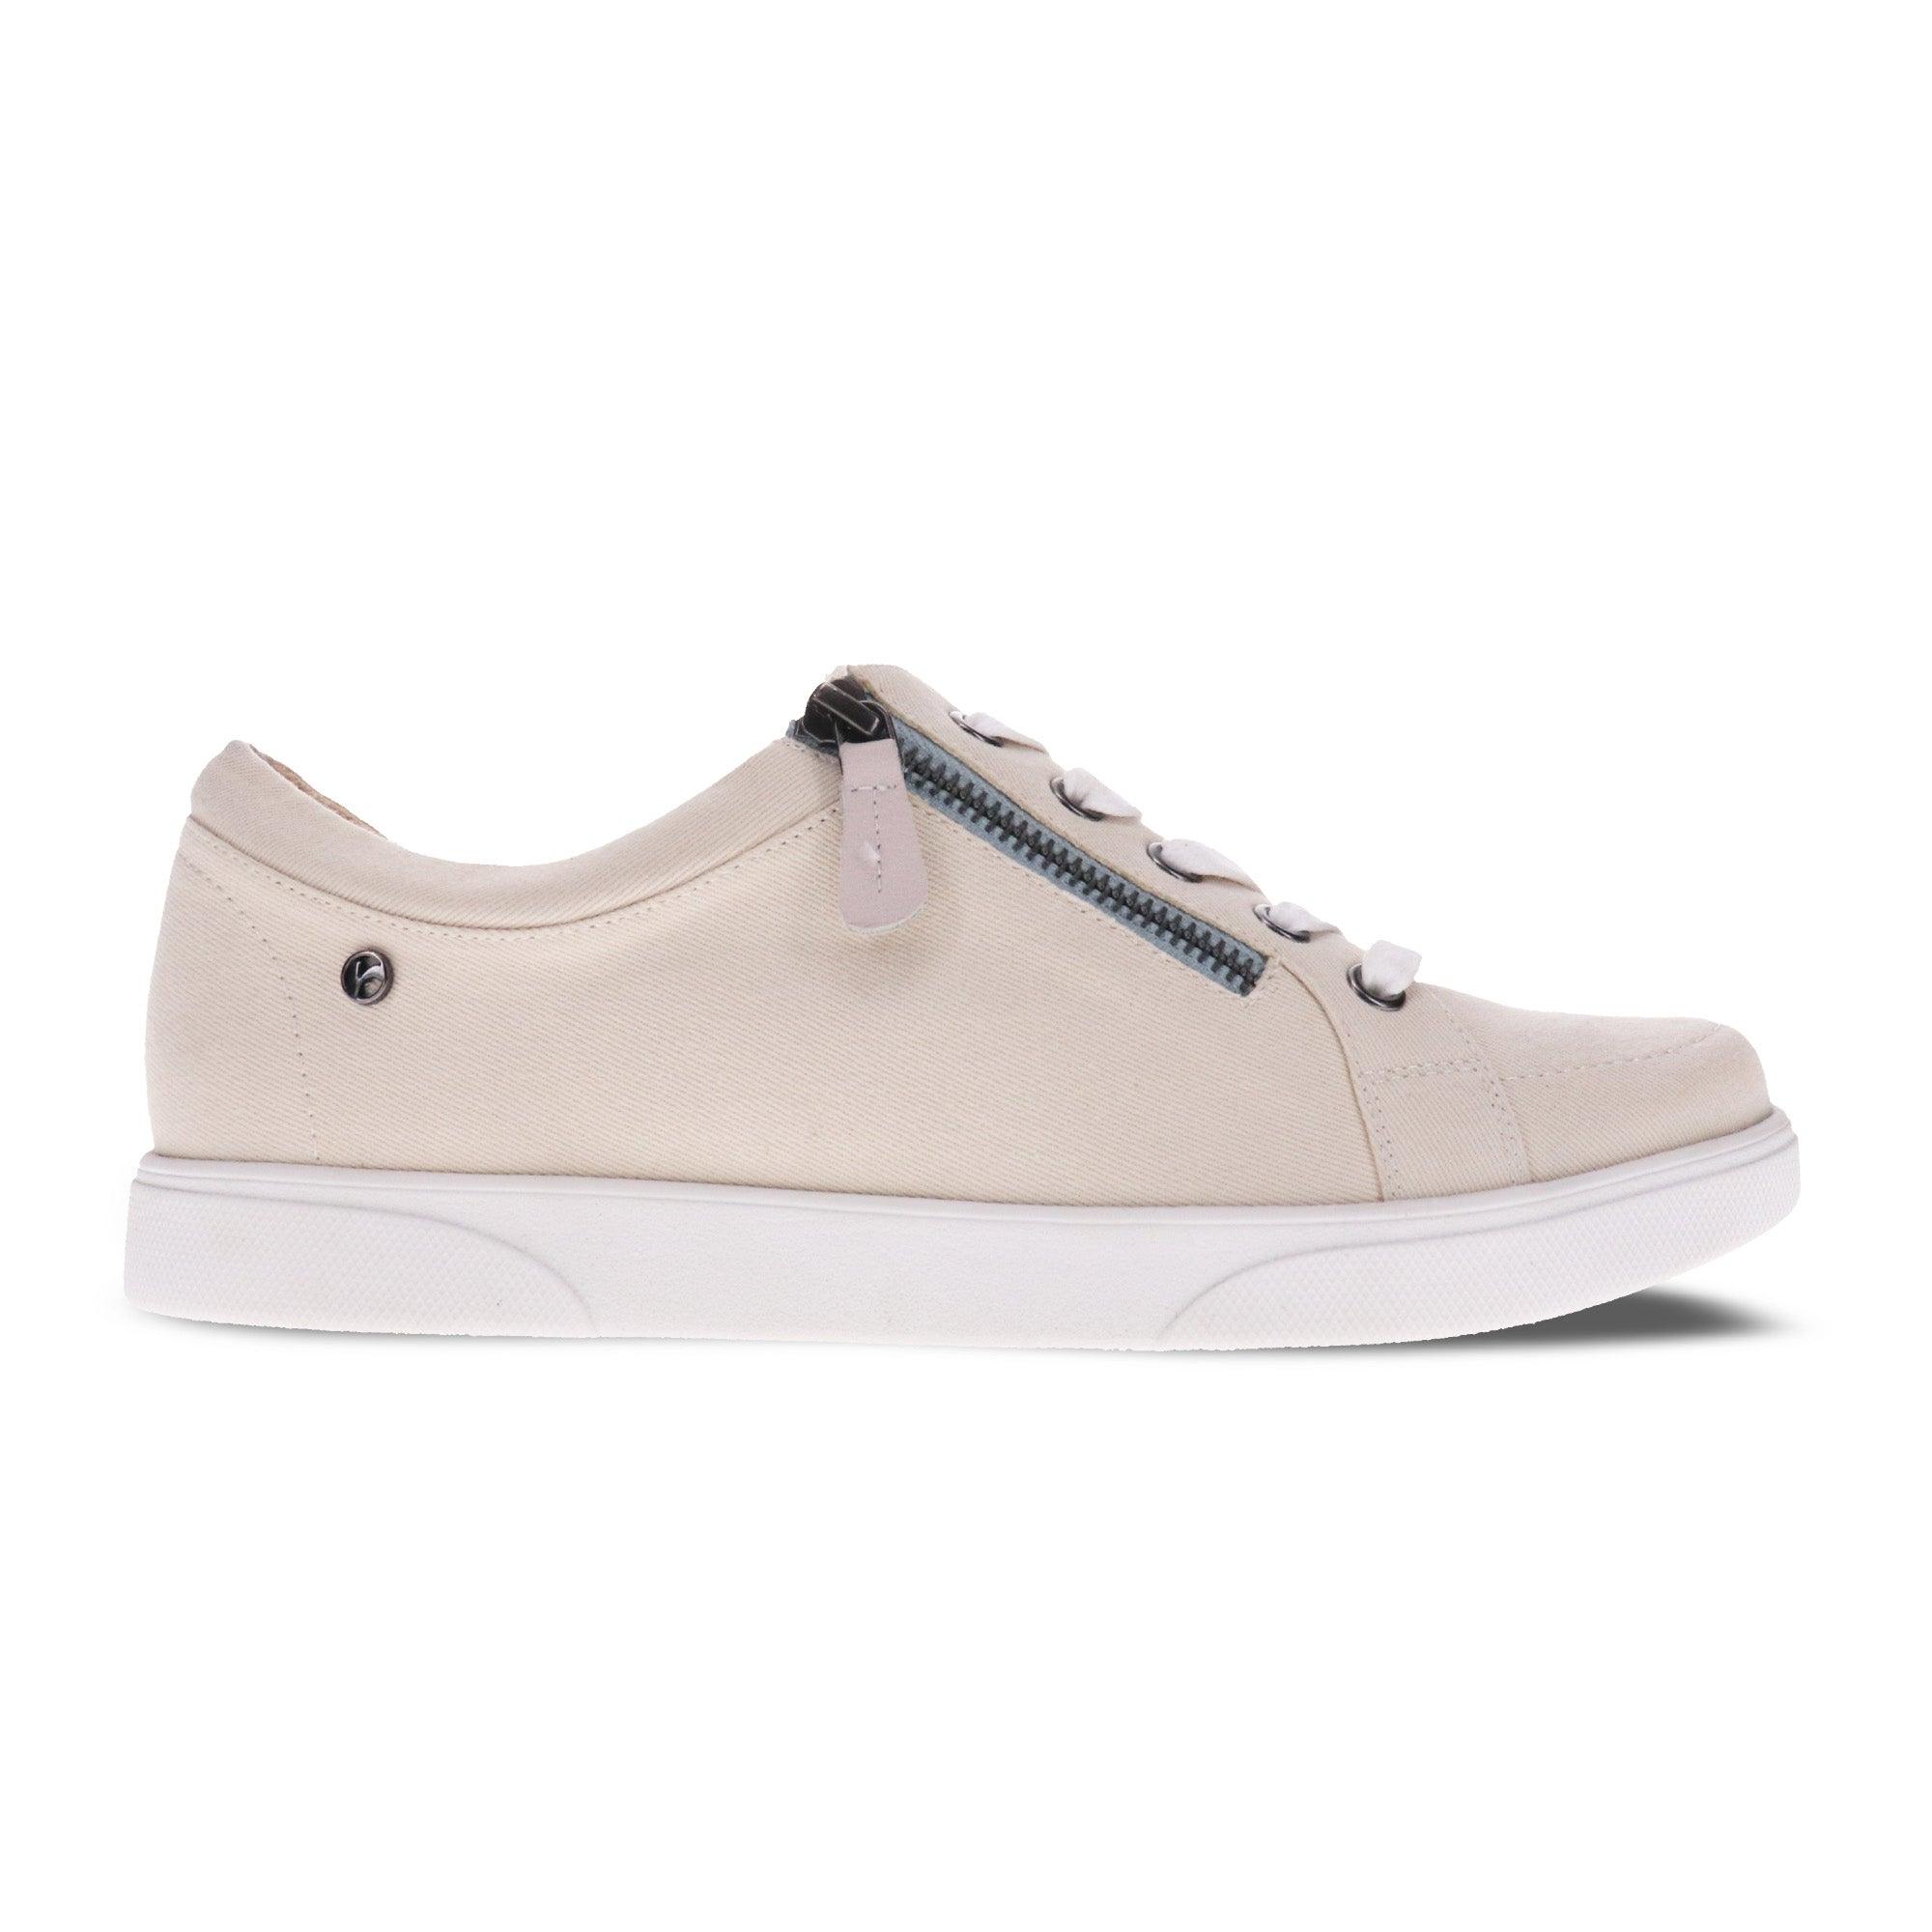 Ripon Canvas Sneakers - Revere Shoes